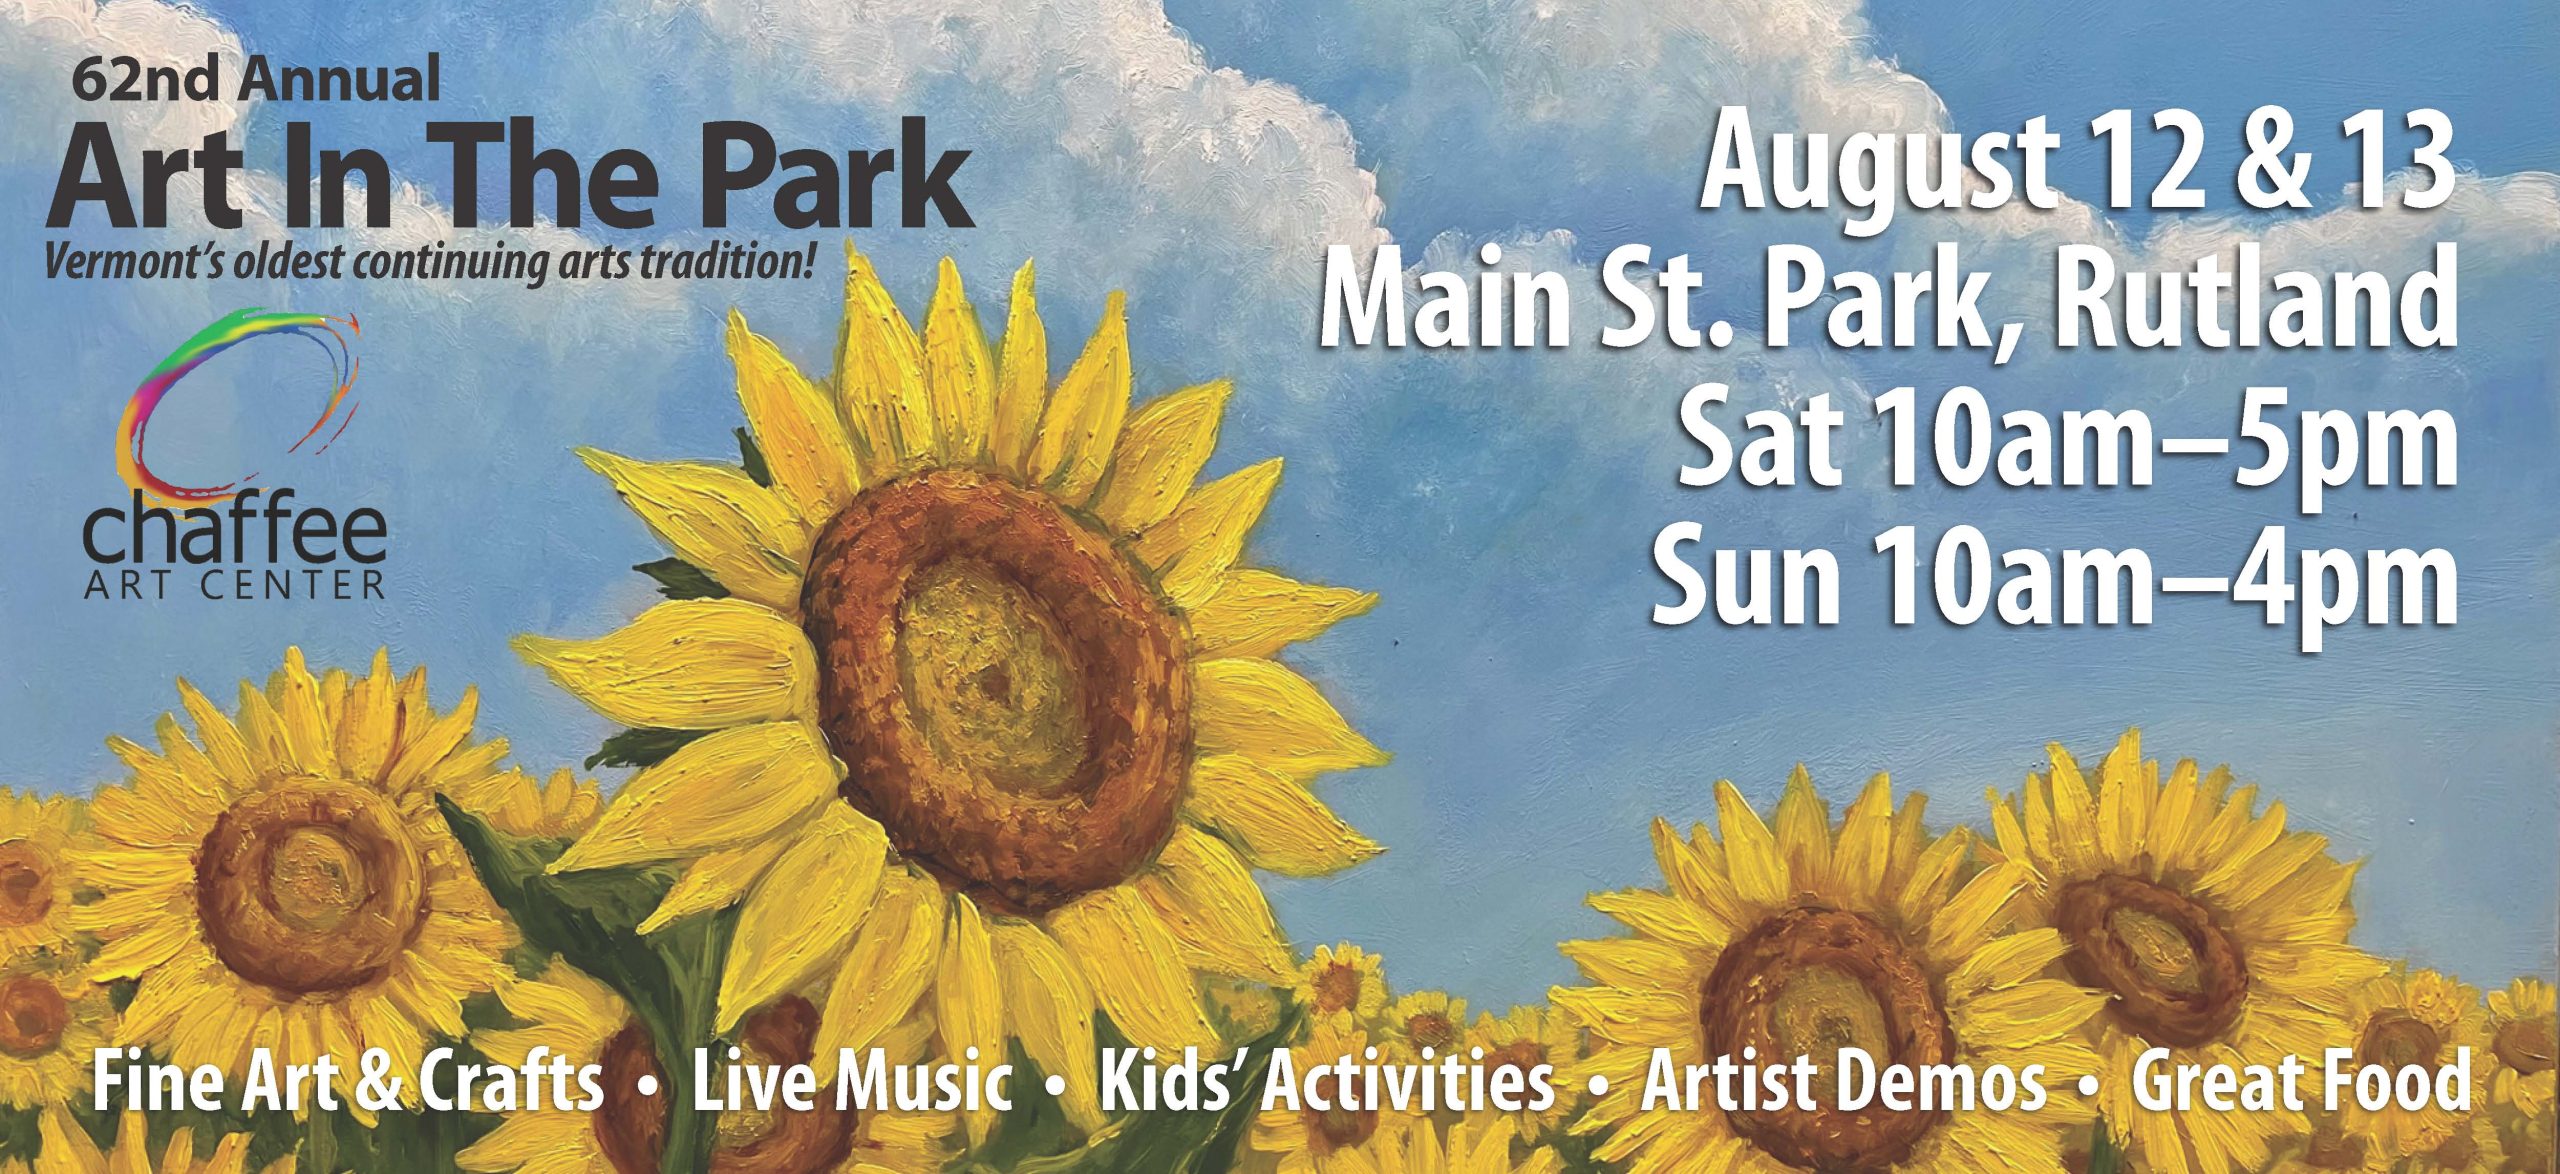 62nd Annual Art in the Park